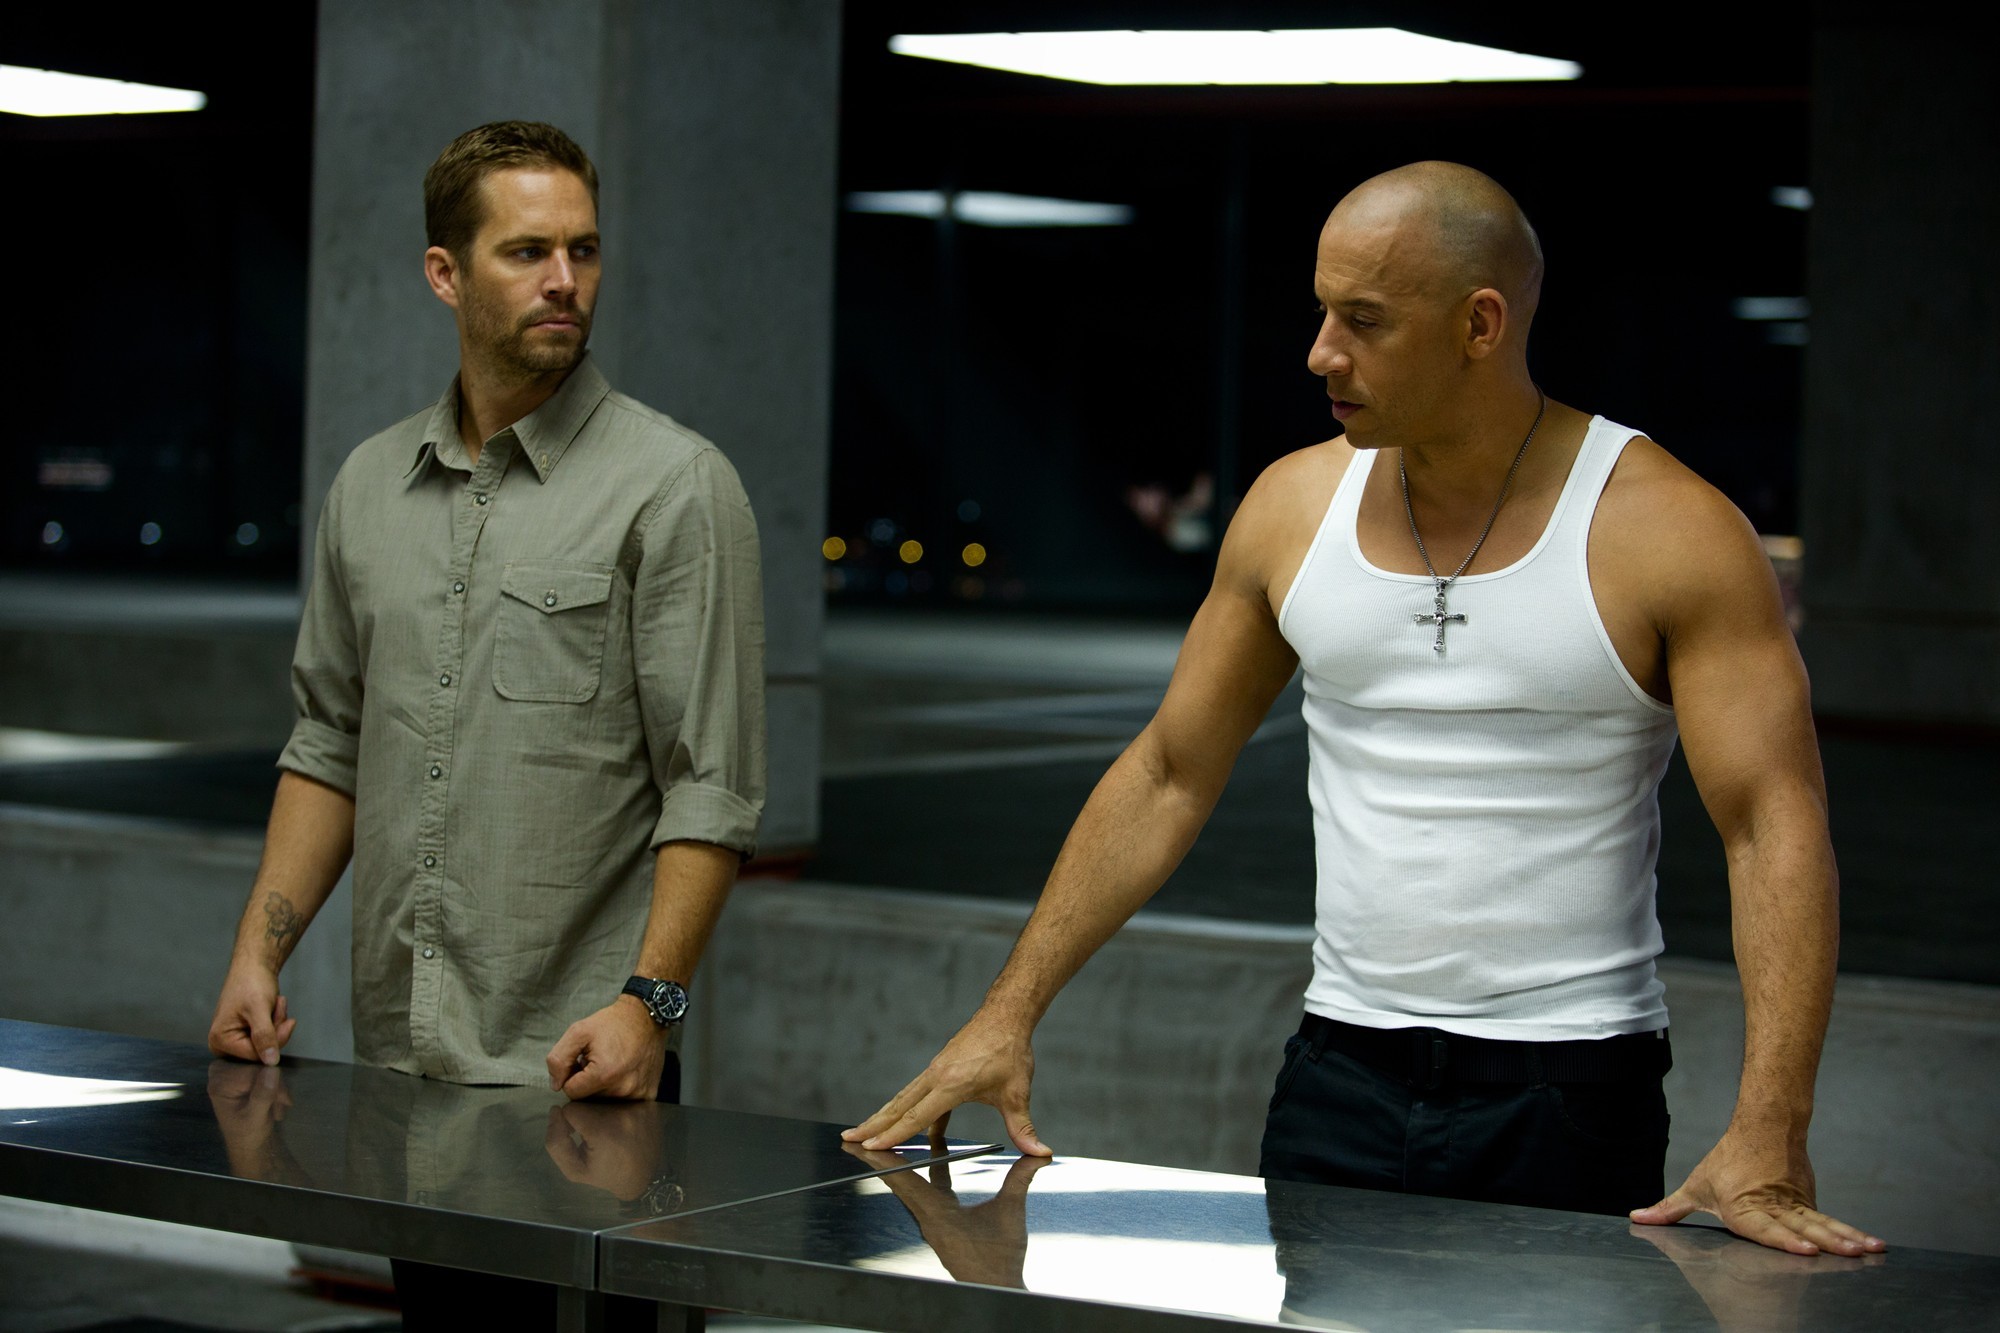 Paul Walker stars as Brian O'Conner and Vin Diesel stars as Dominic Toretto in Universal Pictures' Fast and Furious 6 (2013)